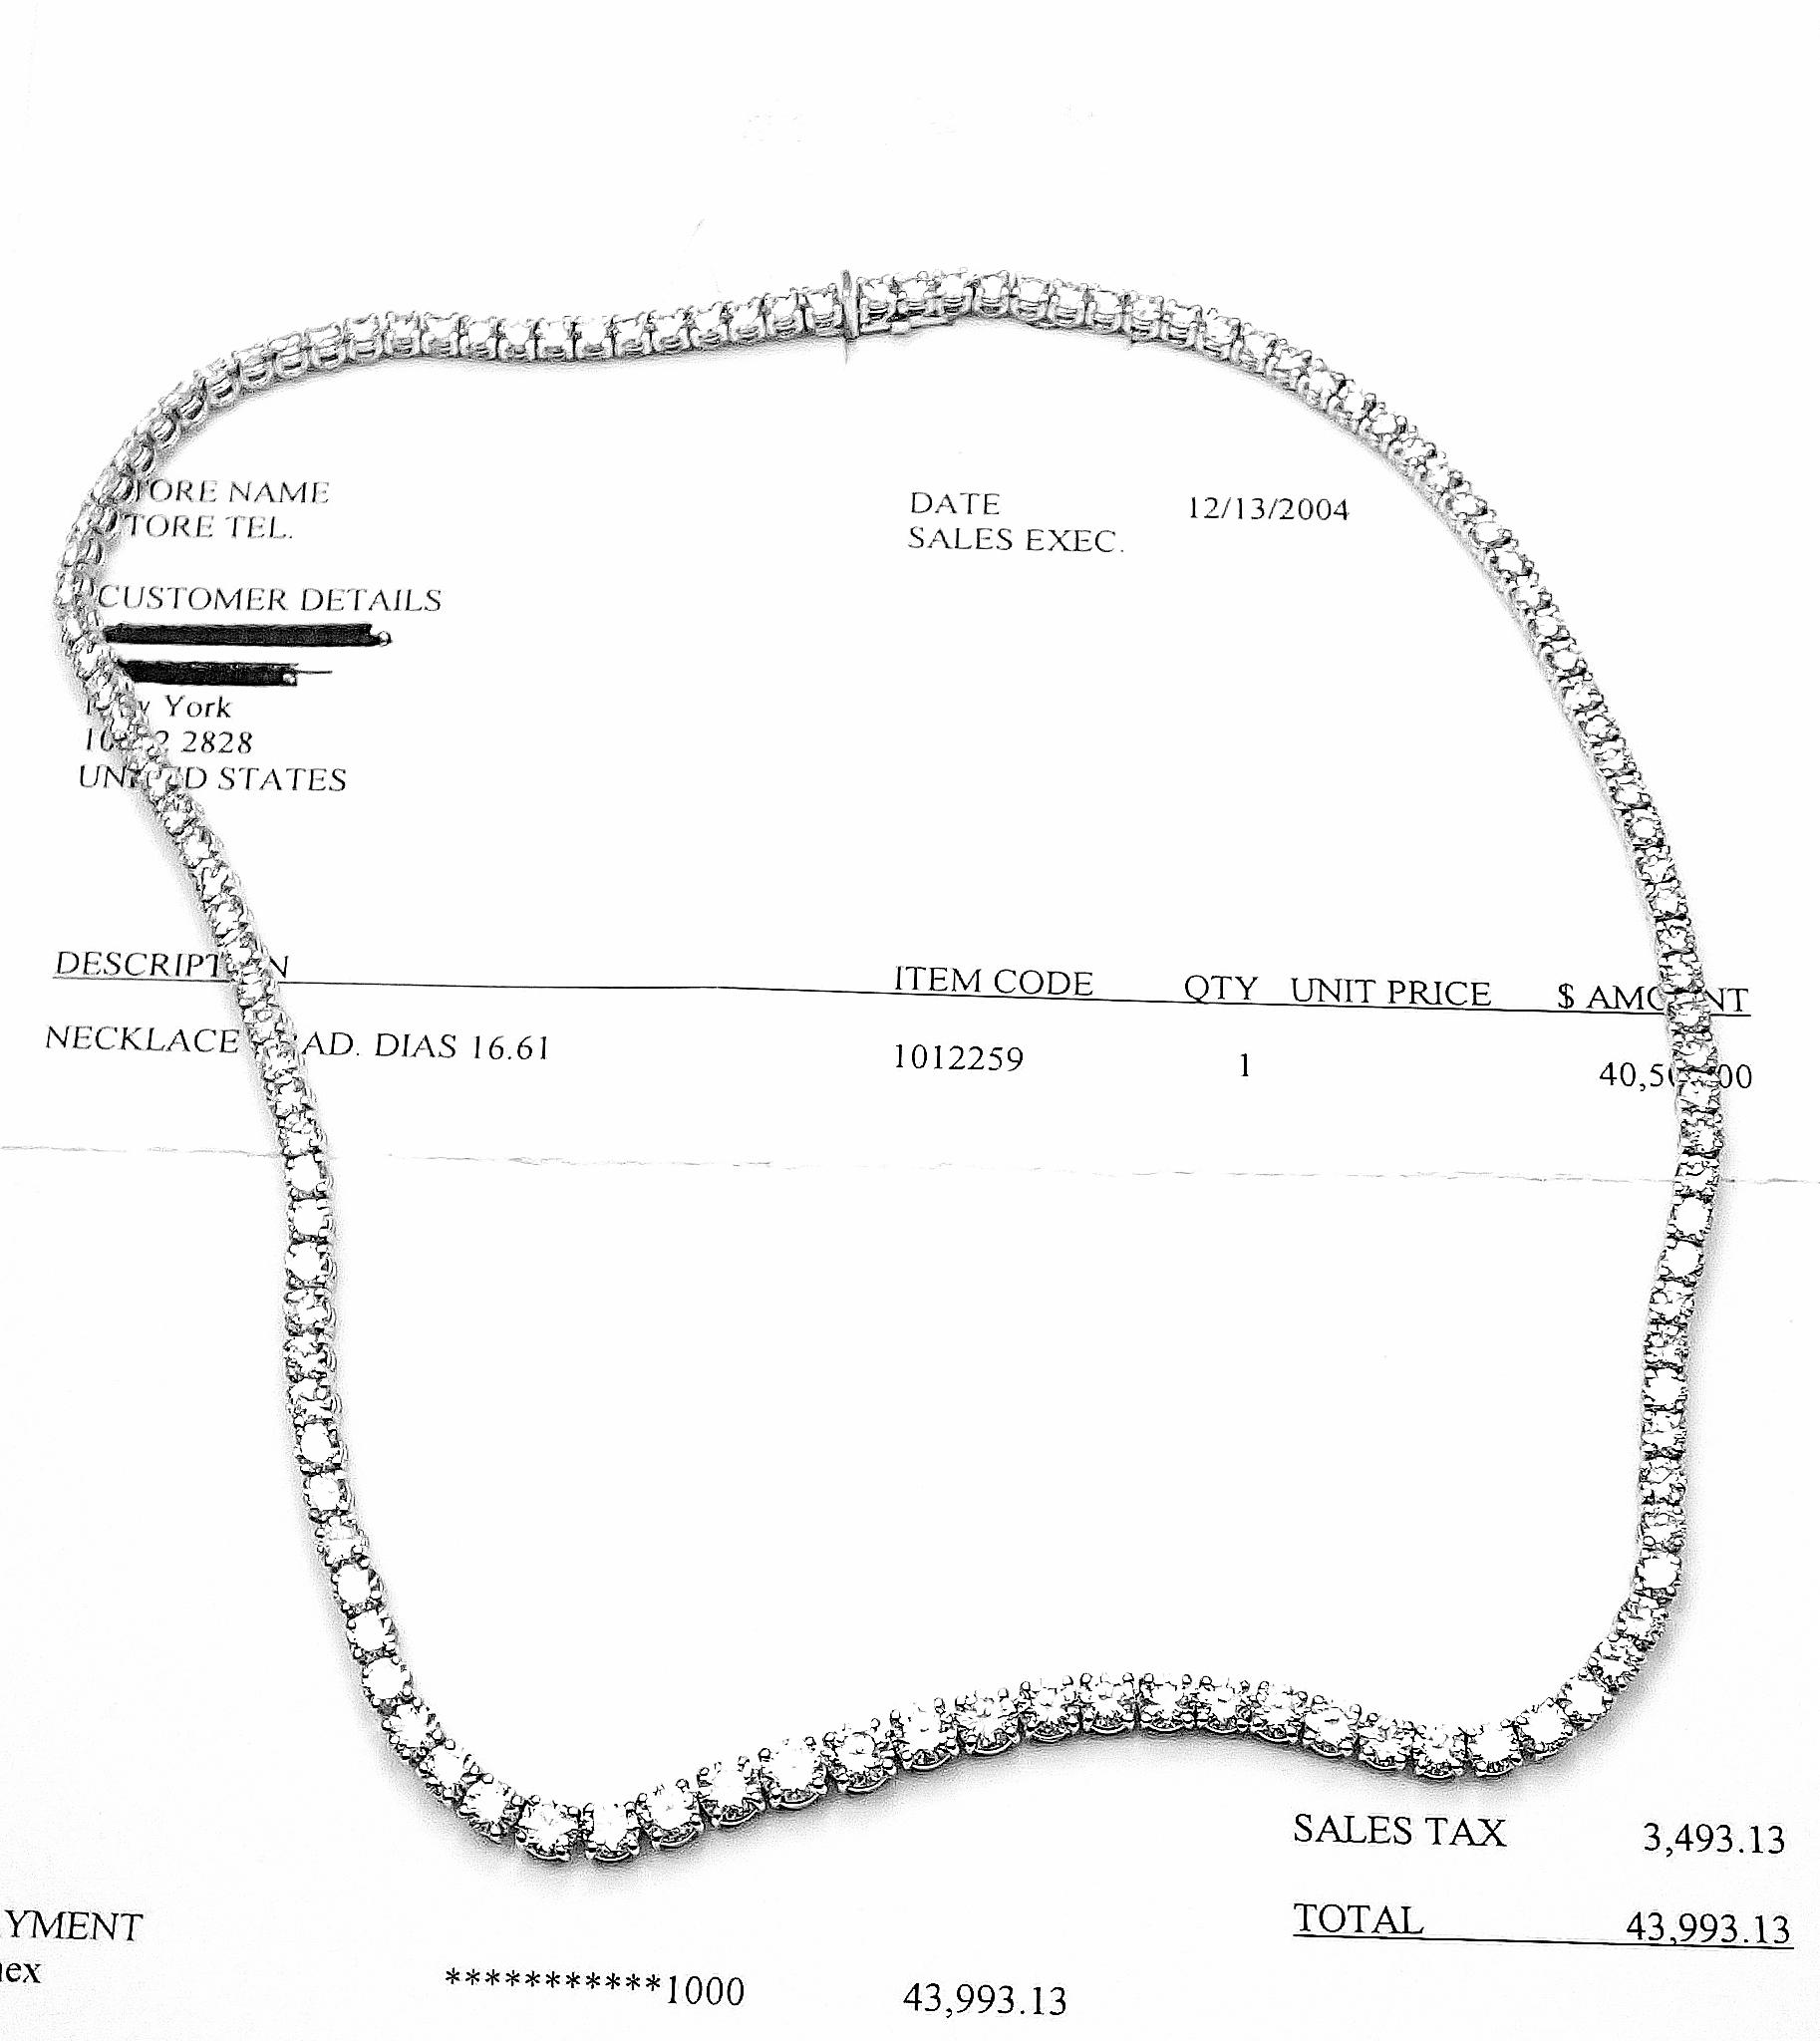 Platinum Graduating Diamond Riviera Necklace by Asprey.
With 122 Round brilliant cut diamonds F color, VVS1 clarity total weight approx. 16.61ct  
This necklace comes with the box and a certificate from 2004 for $40,000.
Details:
Weight: 31.7